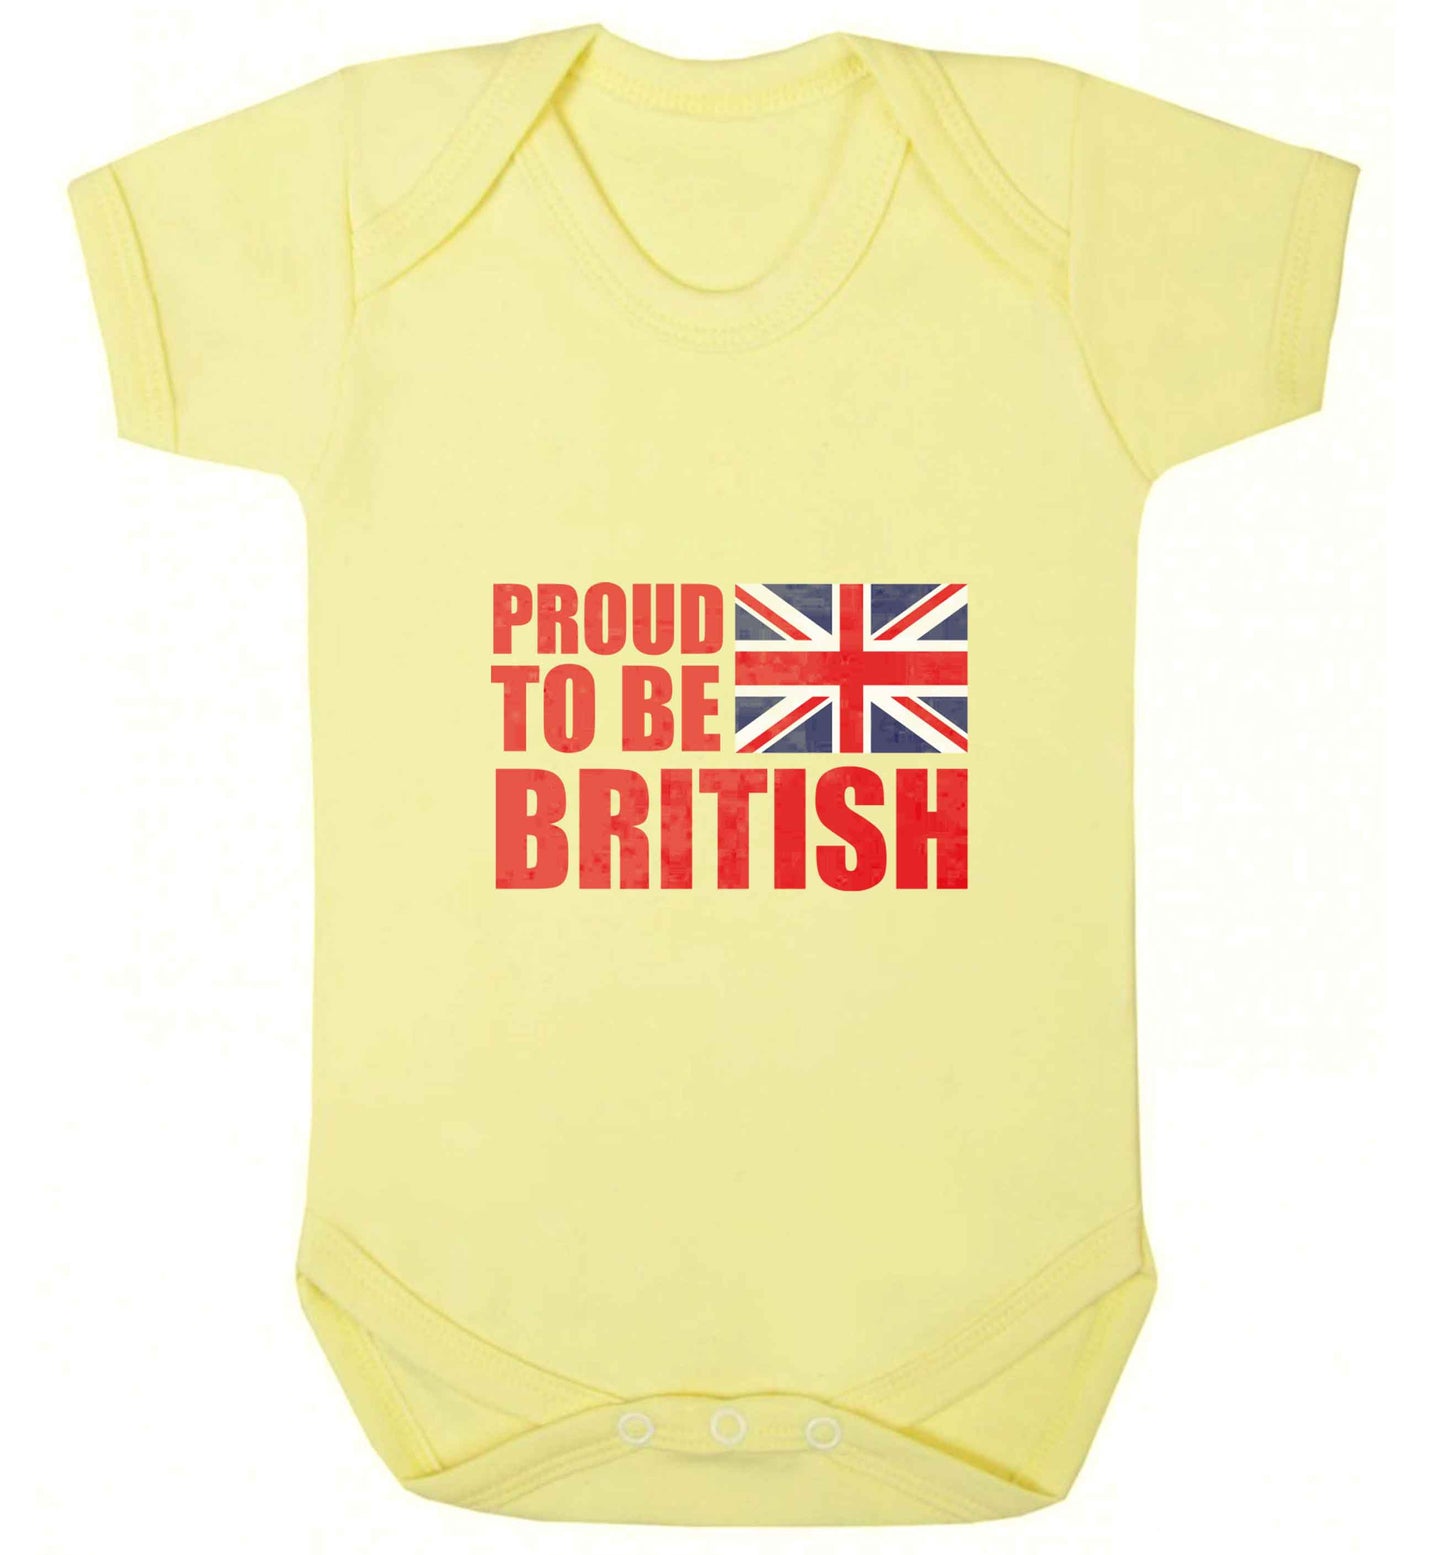 Proud to be British baby vest pale yellow 18-24 months